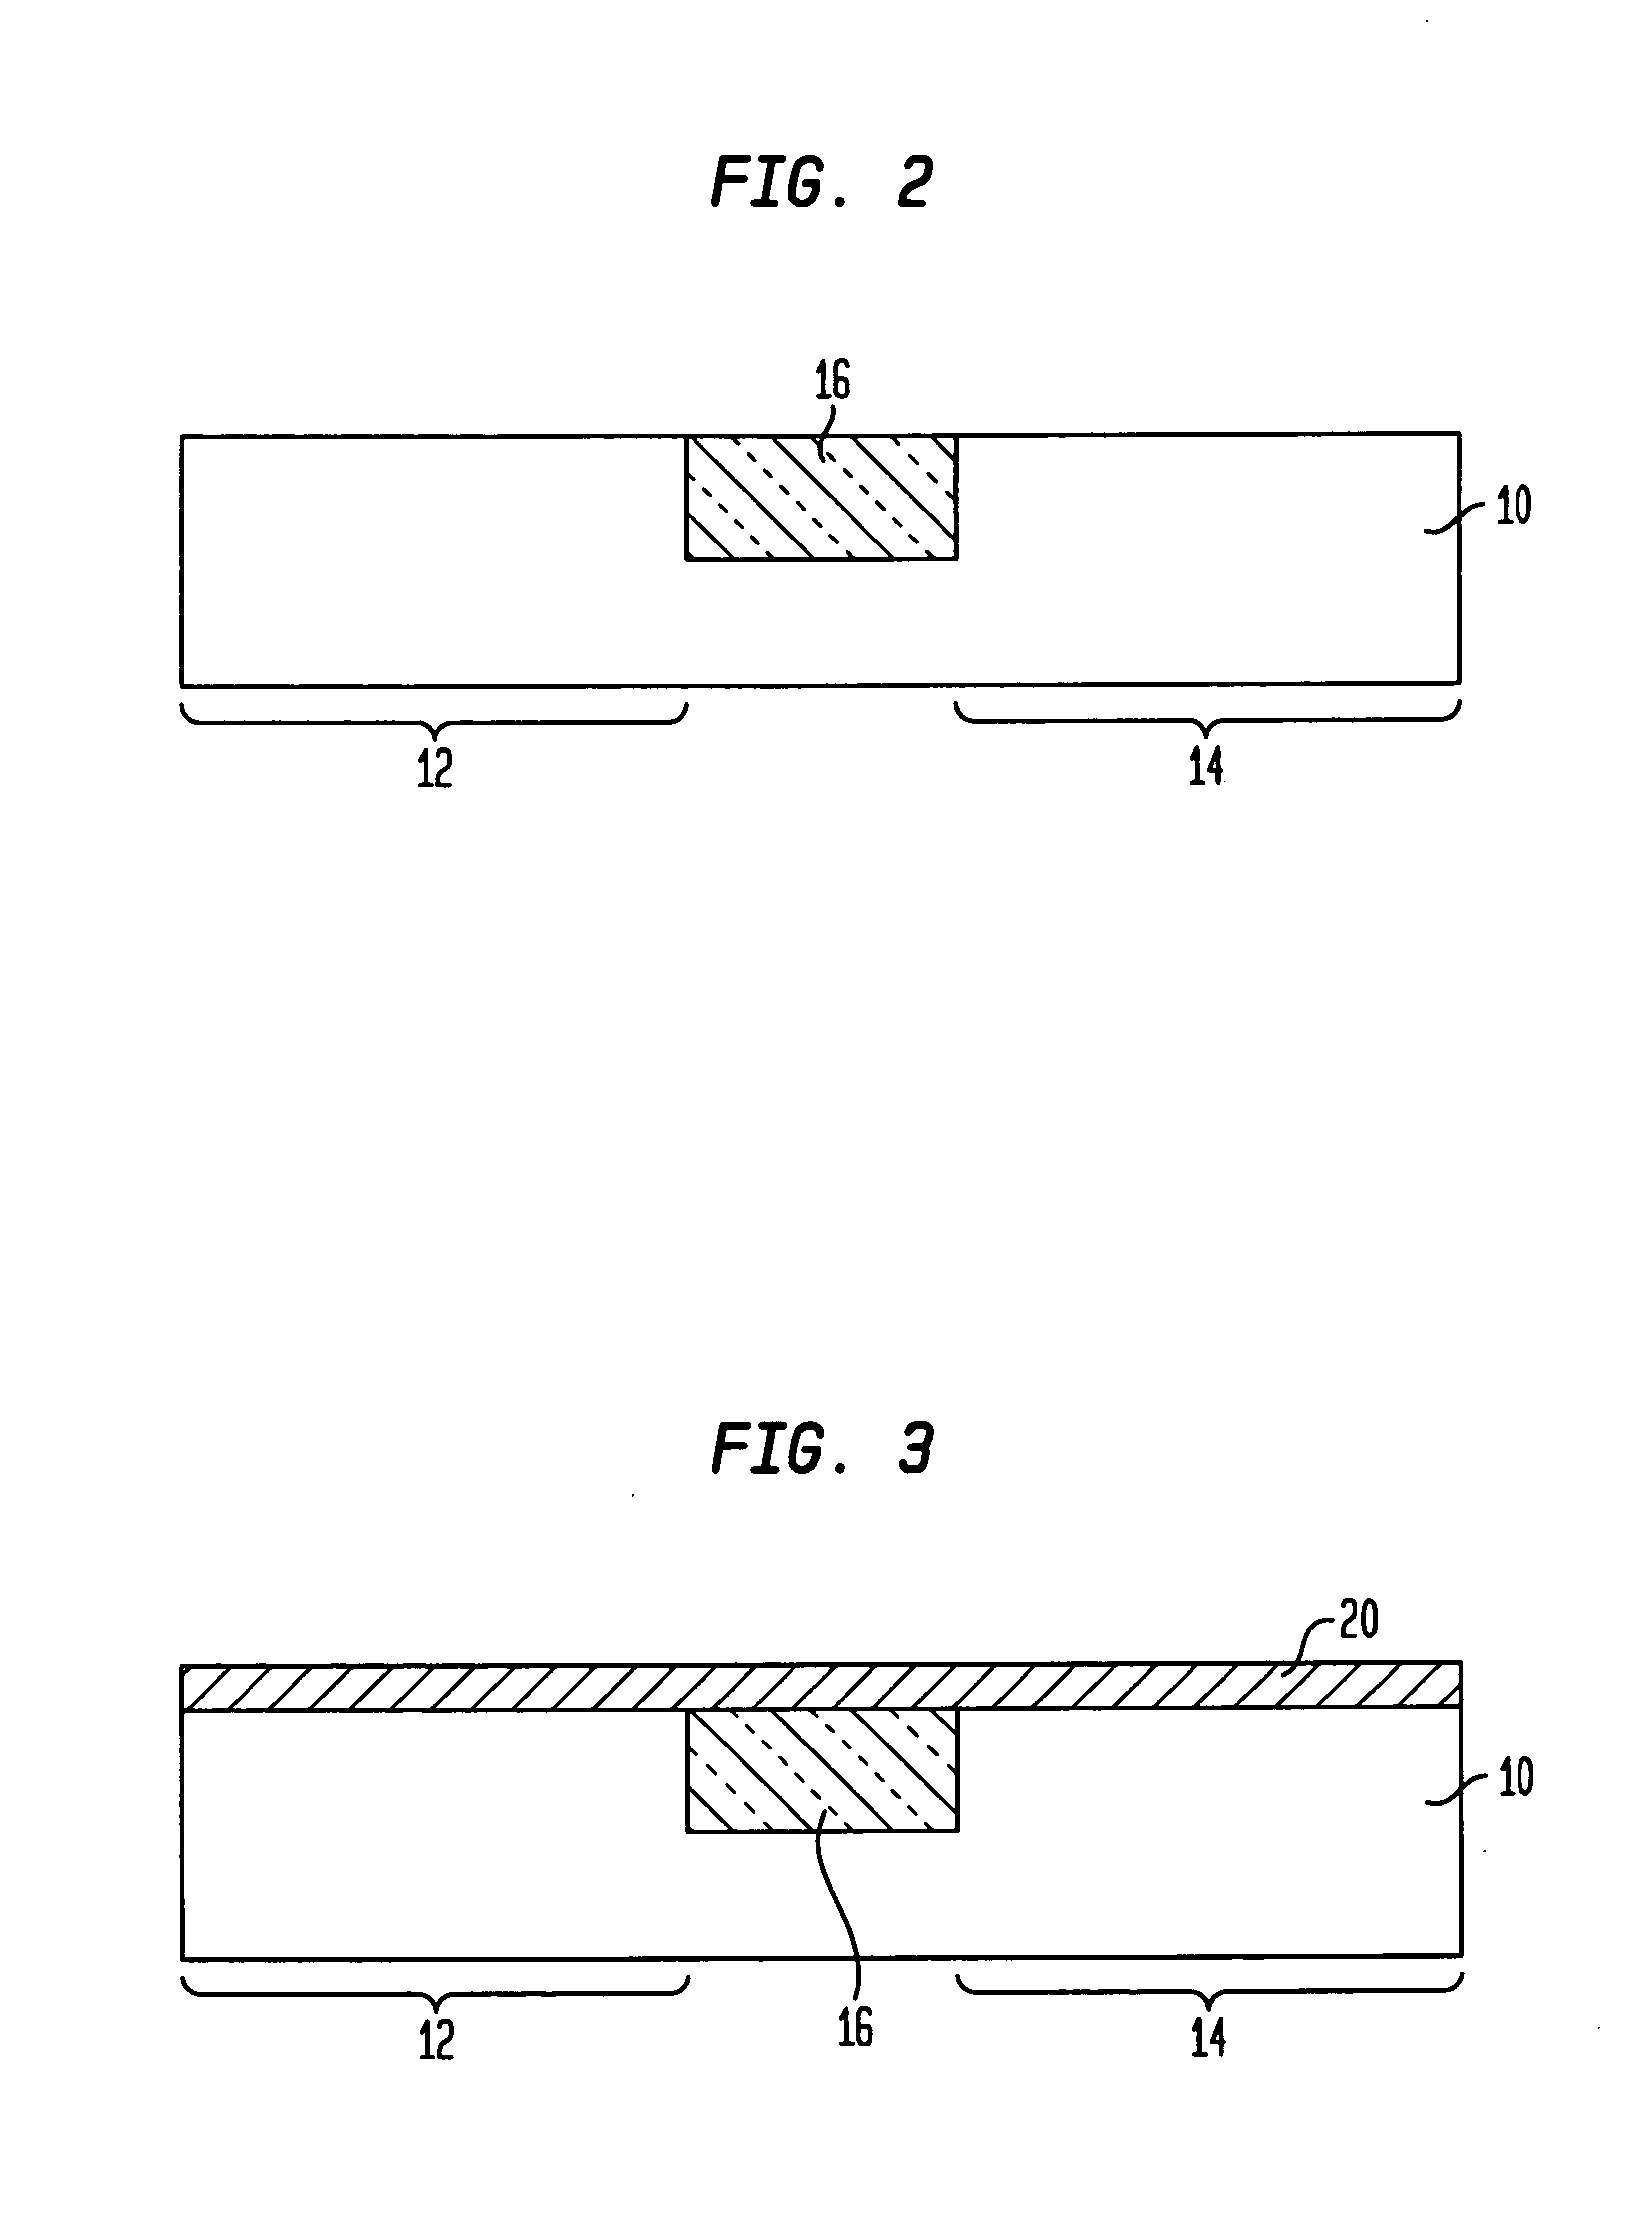 Method for forming self-aligned metal silicide contacts